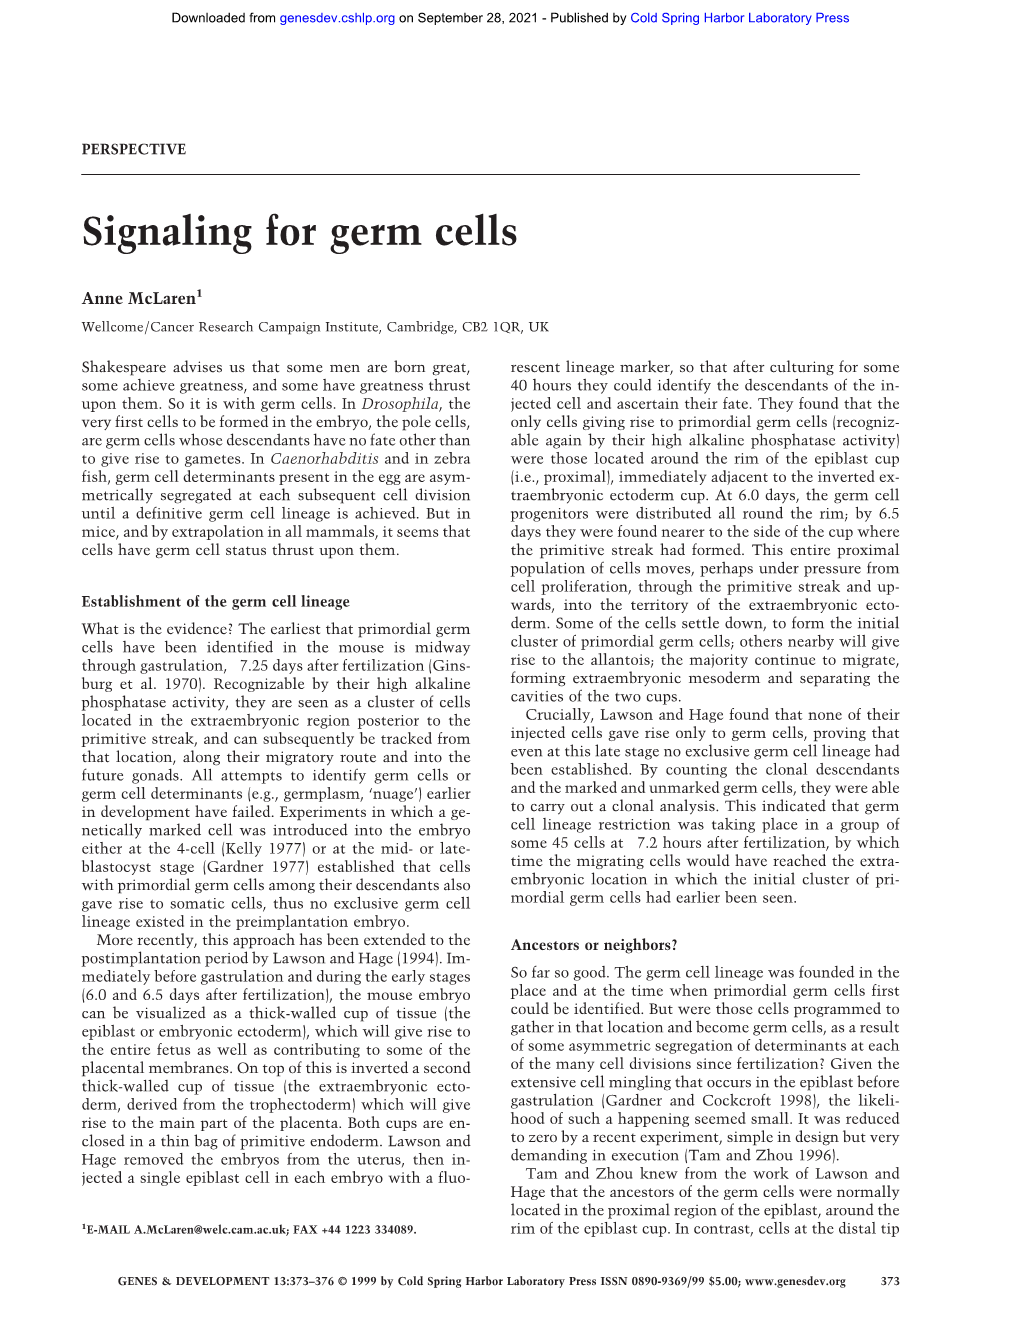 Signaling for Germ Cells